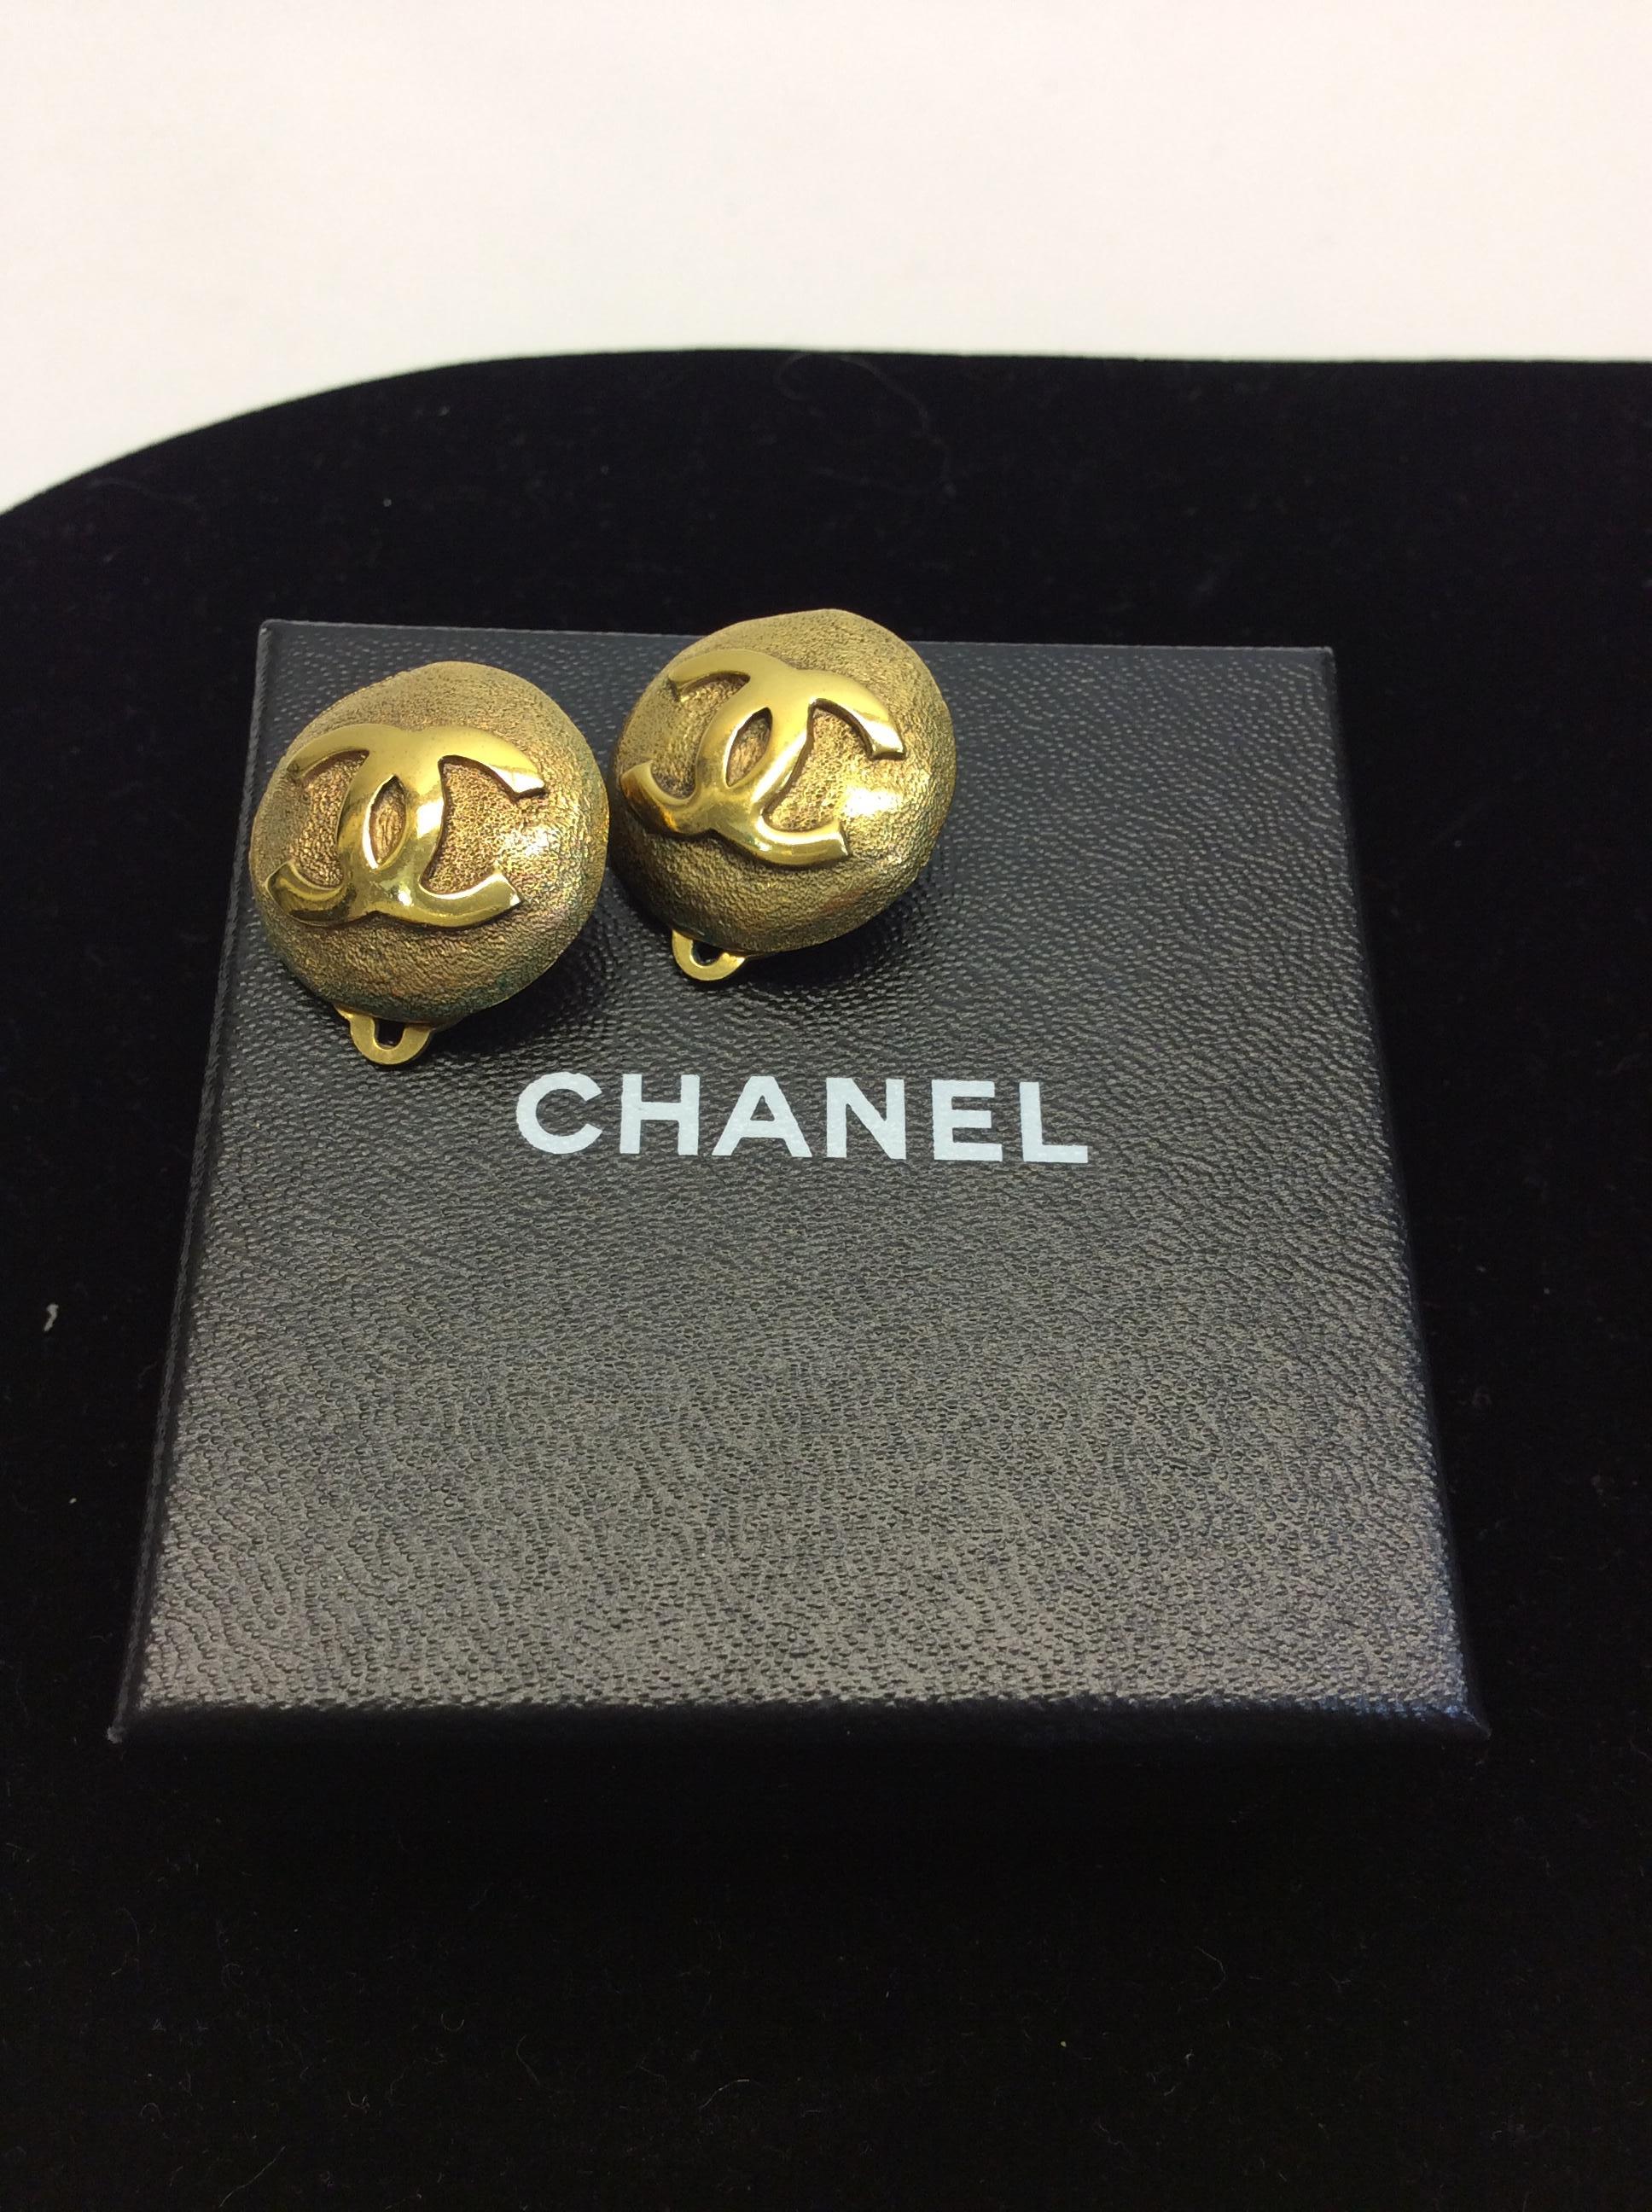 Chanel Gold Tone Clip On Earrings
$399
Made in France